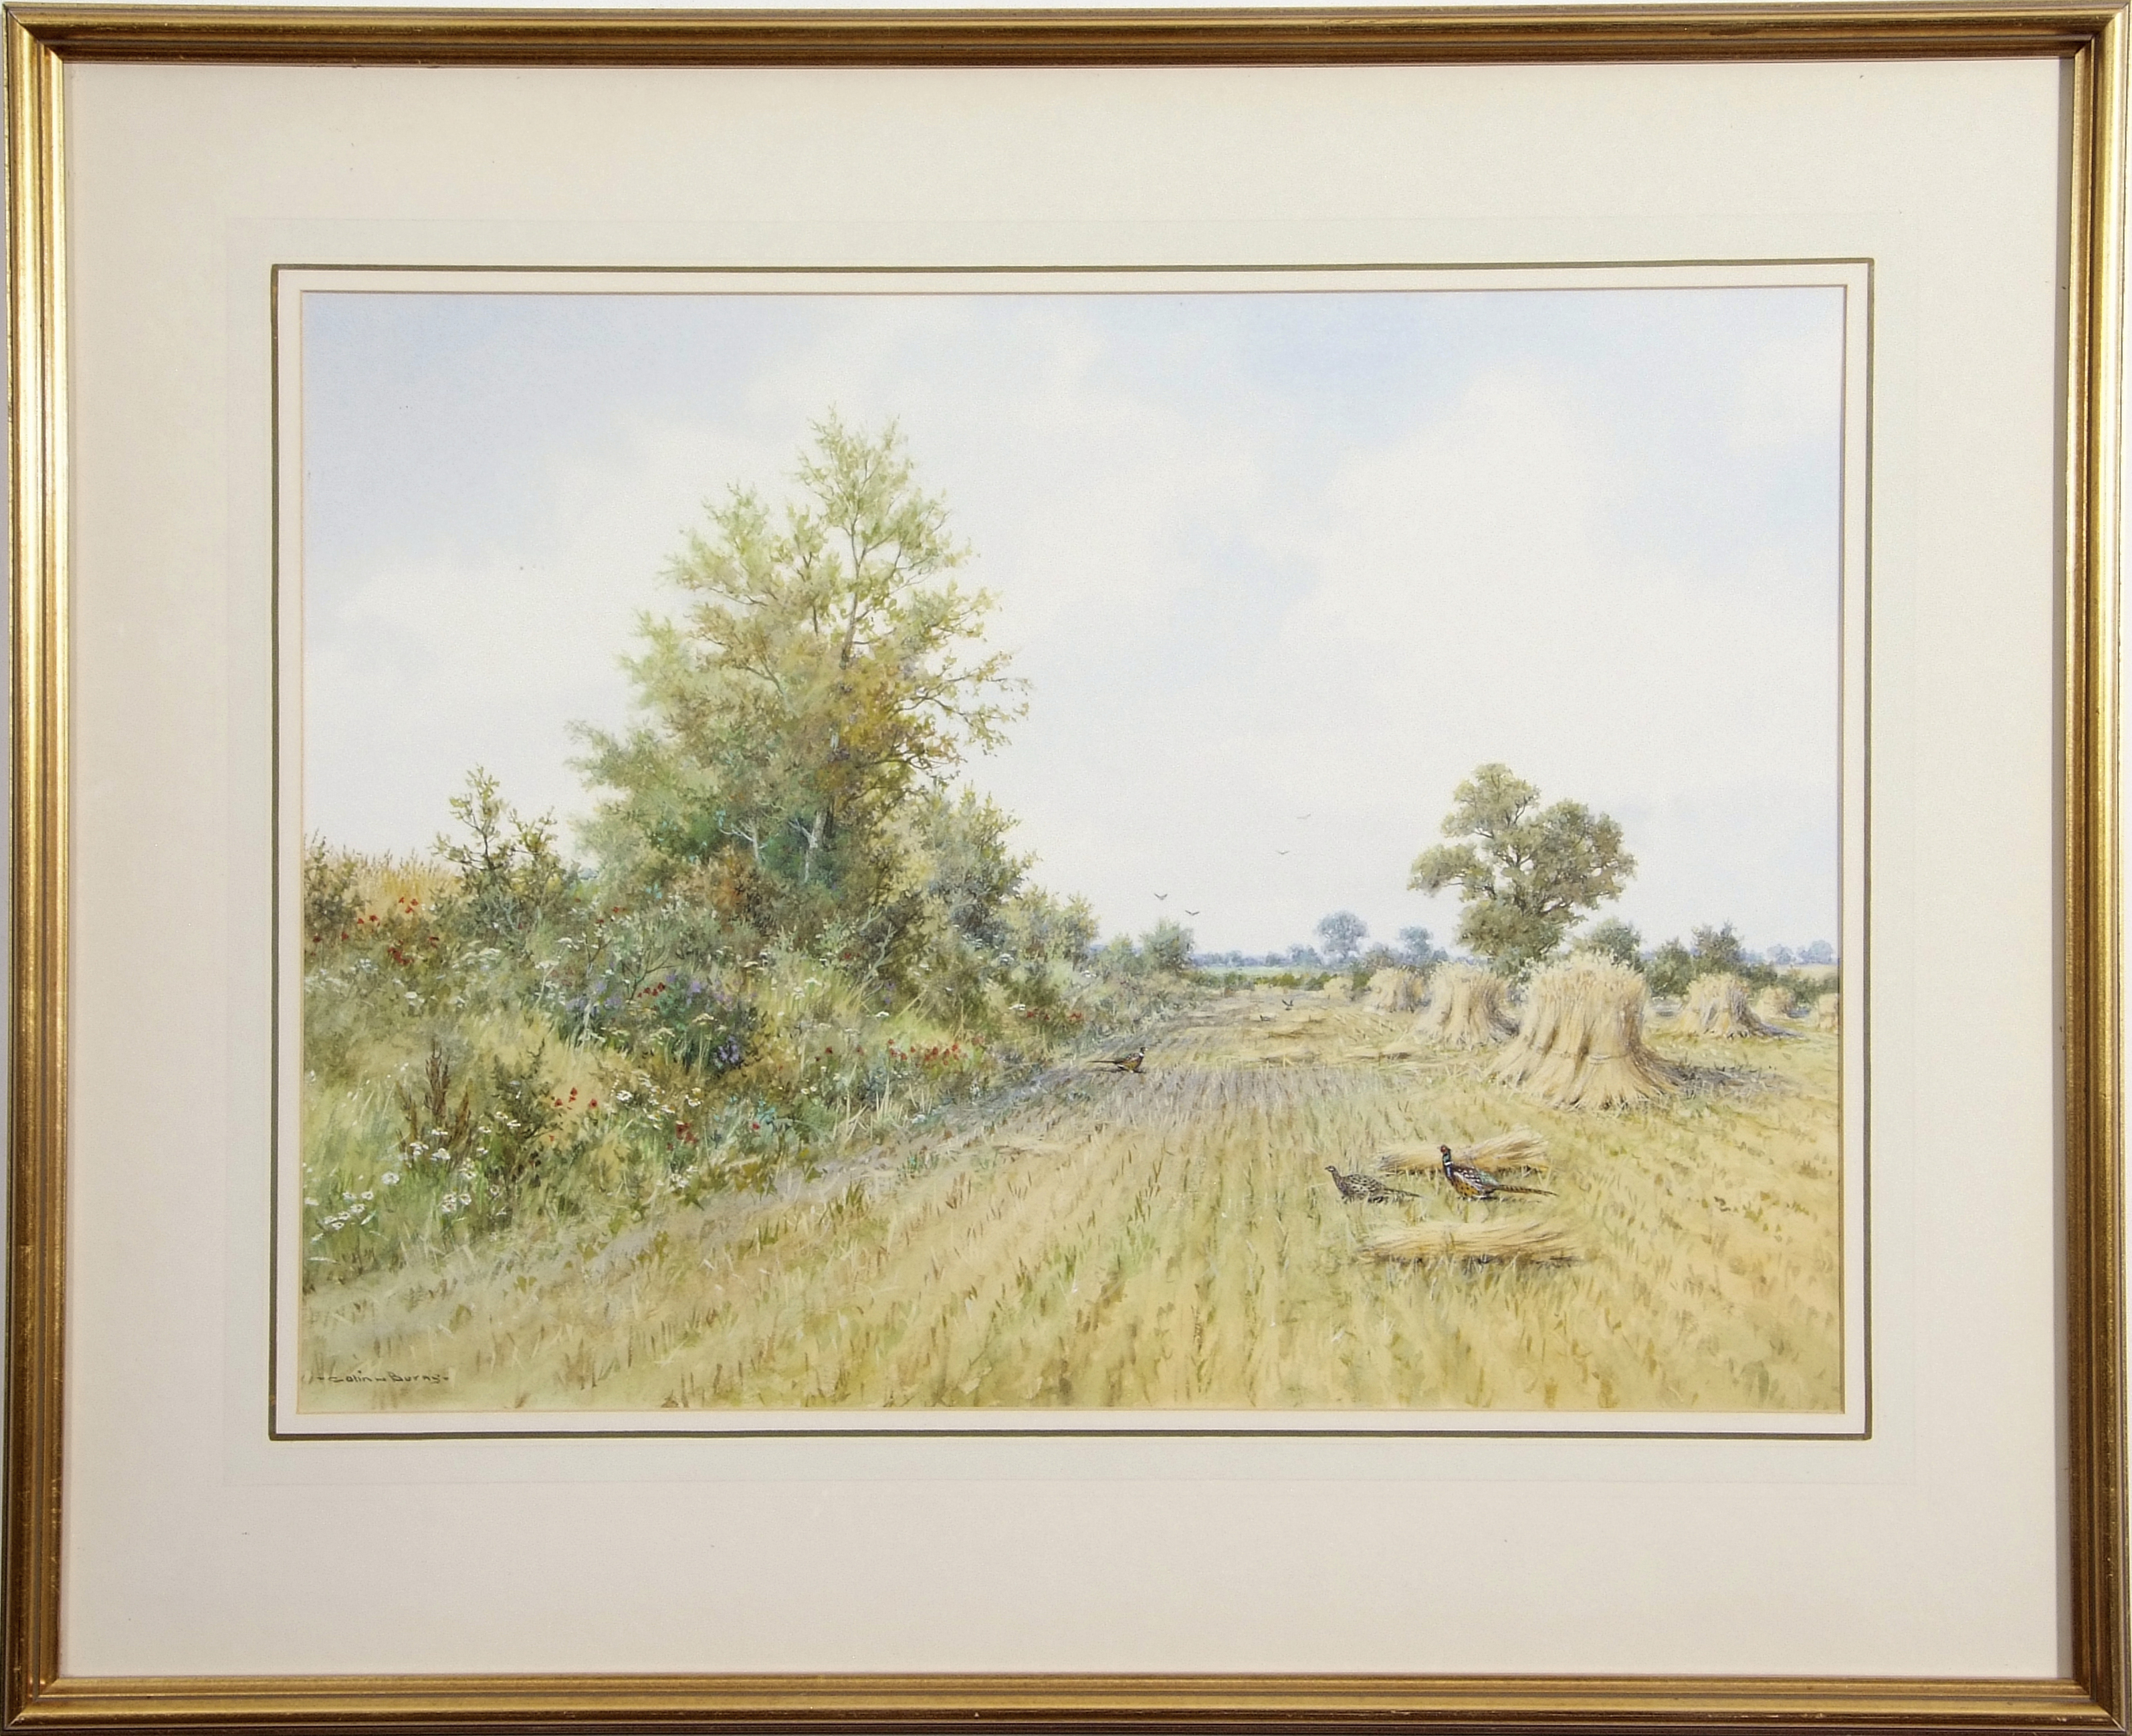 •AR Colin W Burns (born 1944), "Fledgling on the stubble", watercolour, signed lower left, inscribed